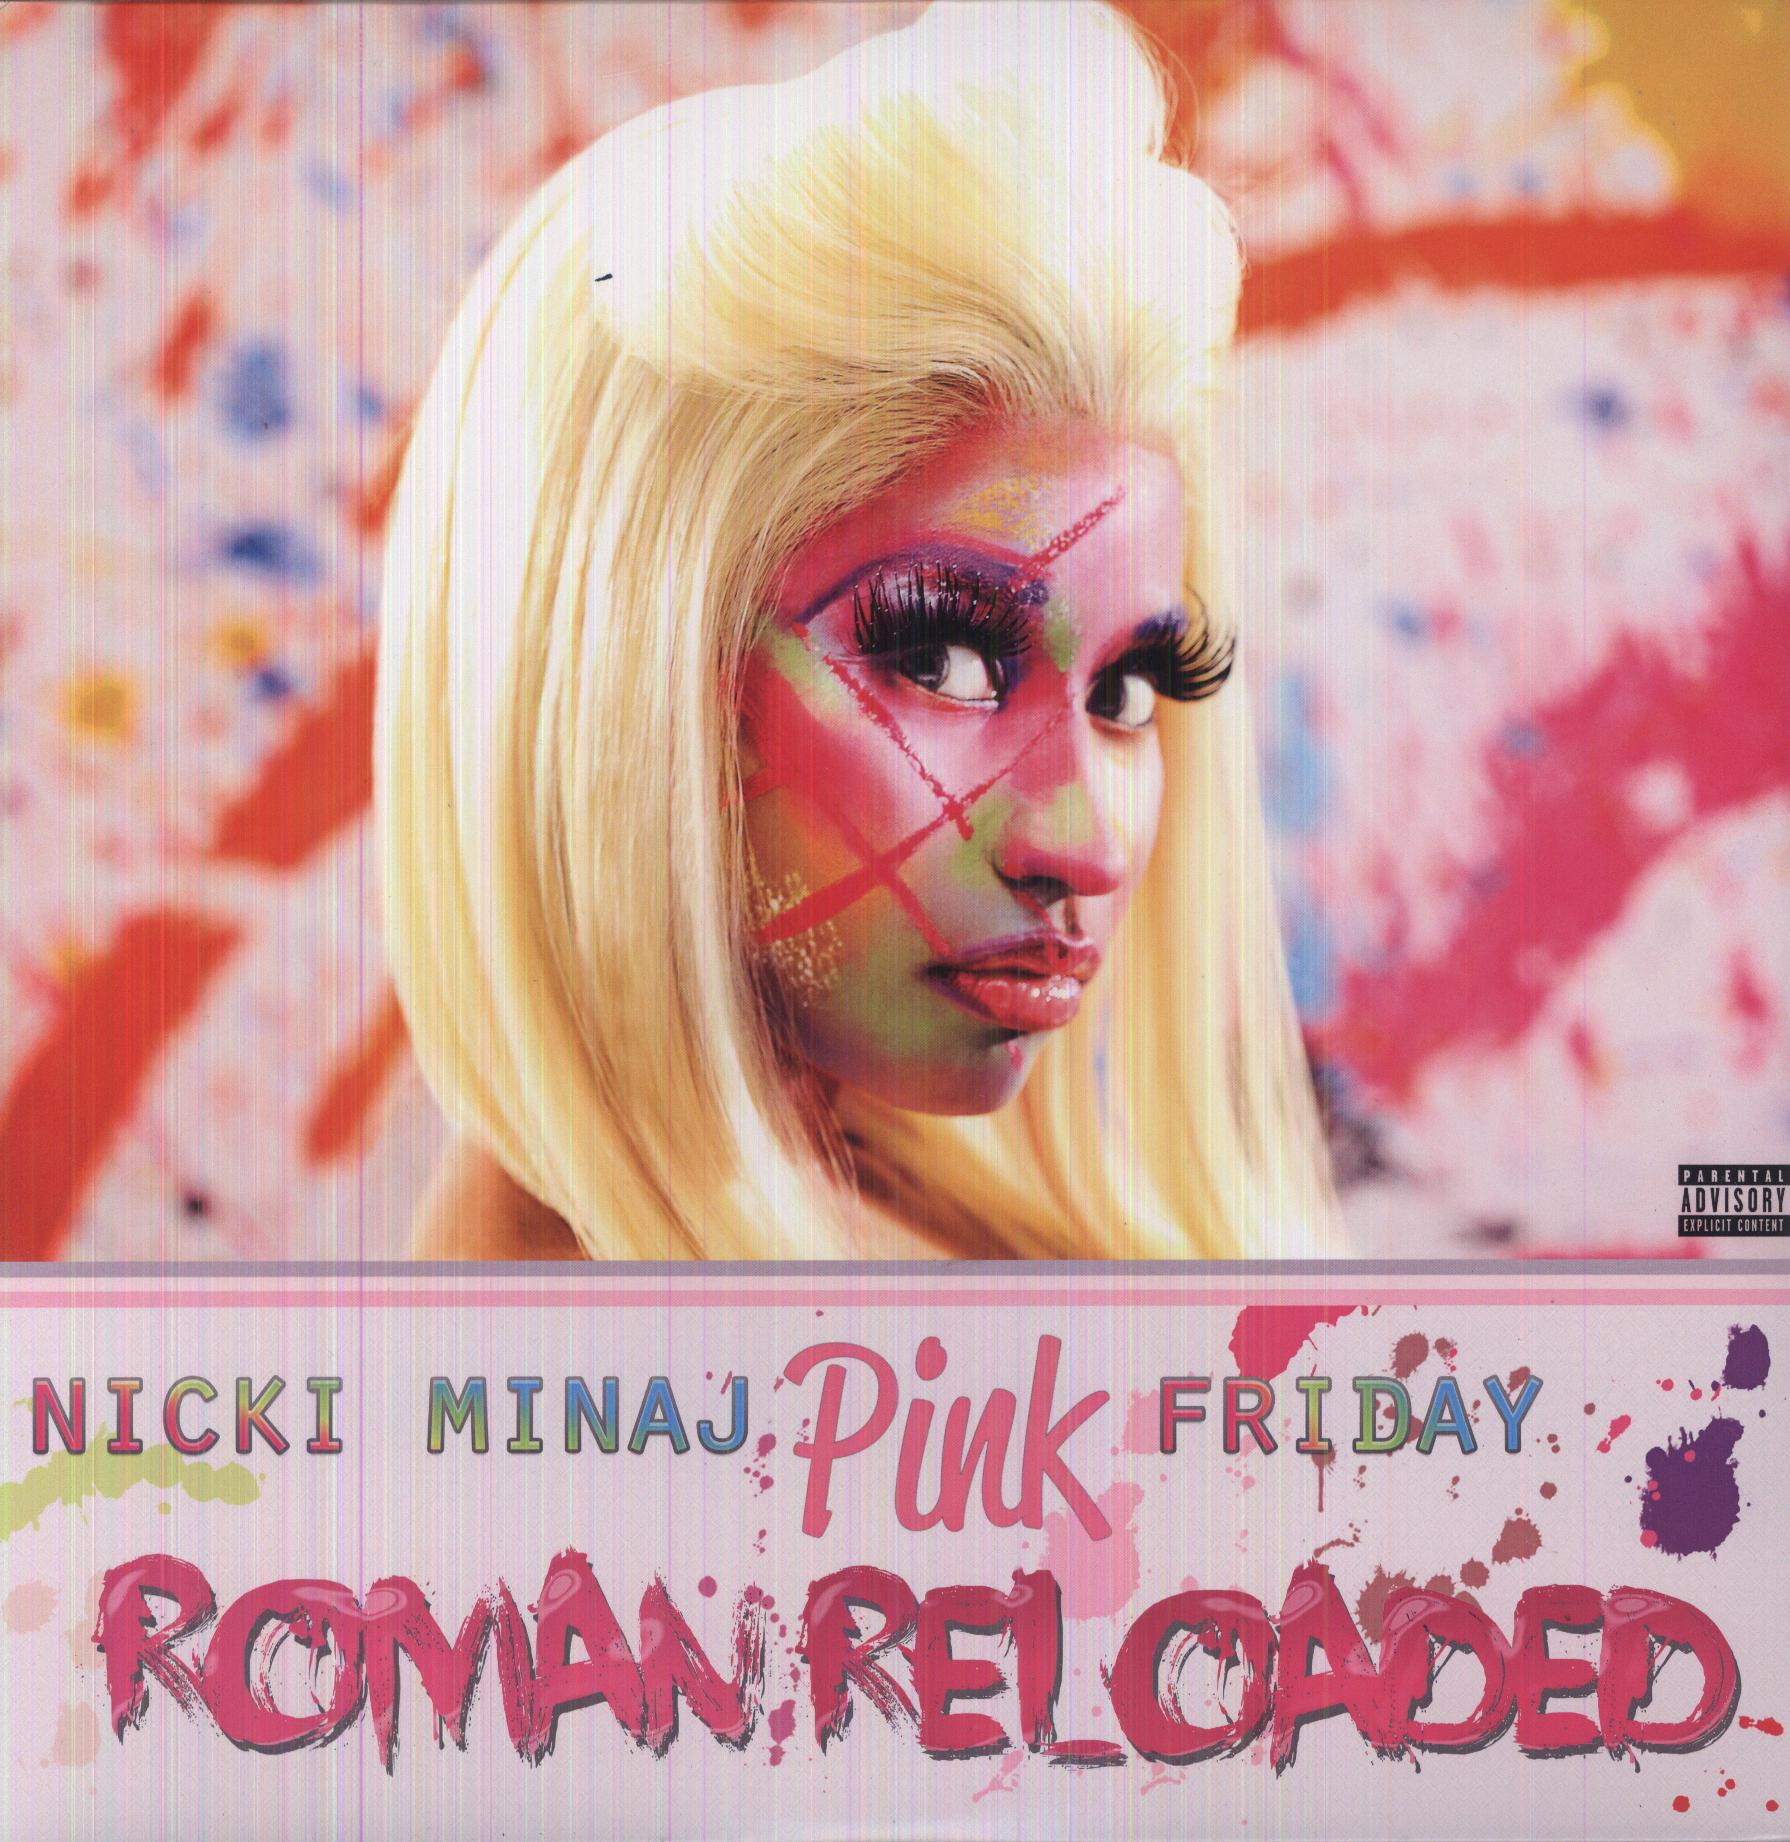 PINK FRIDAY: ROMAN RELOADED